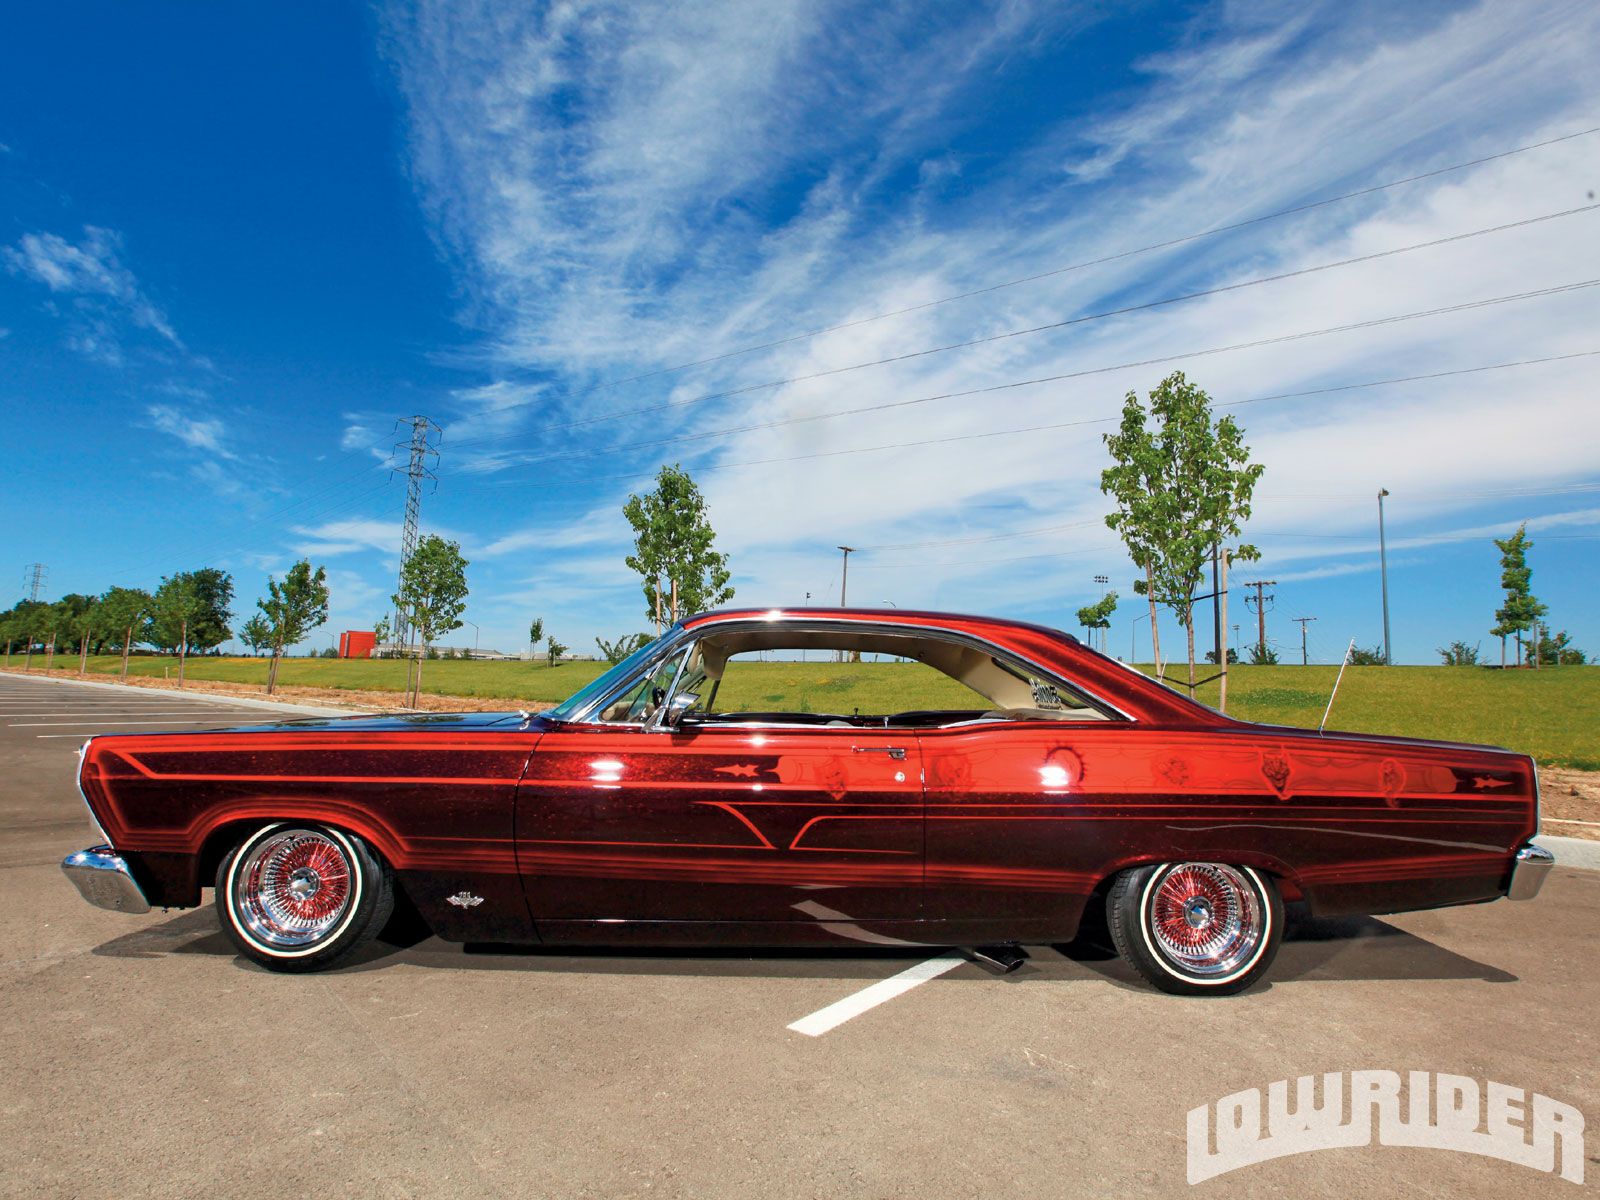 Lowrider Wallpaper Related Keywords & Suggestions - Lowrider ...